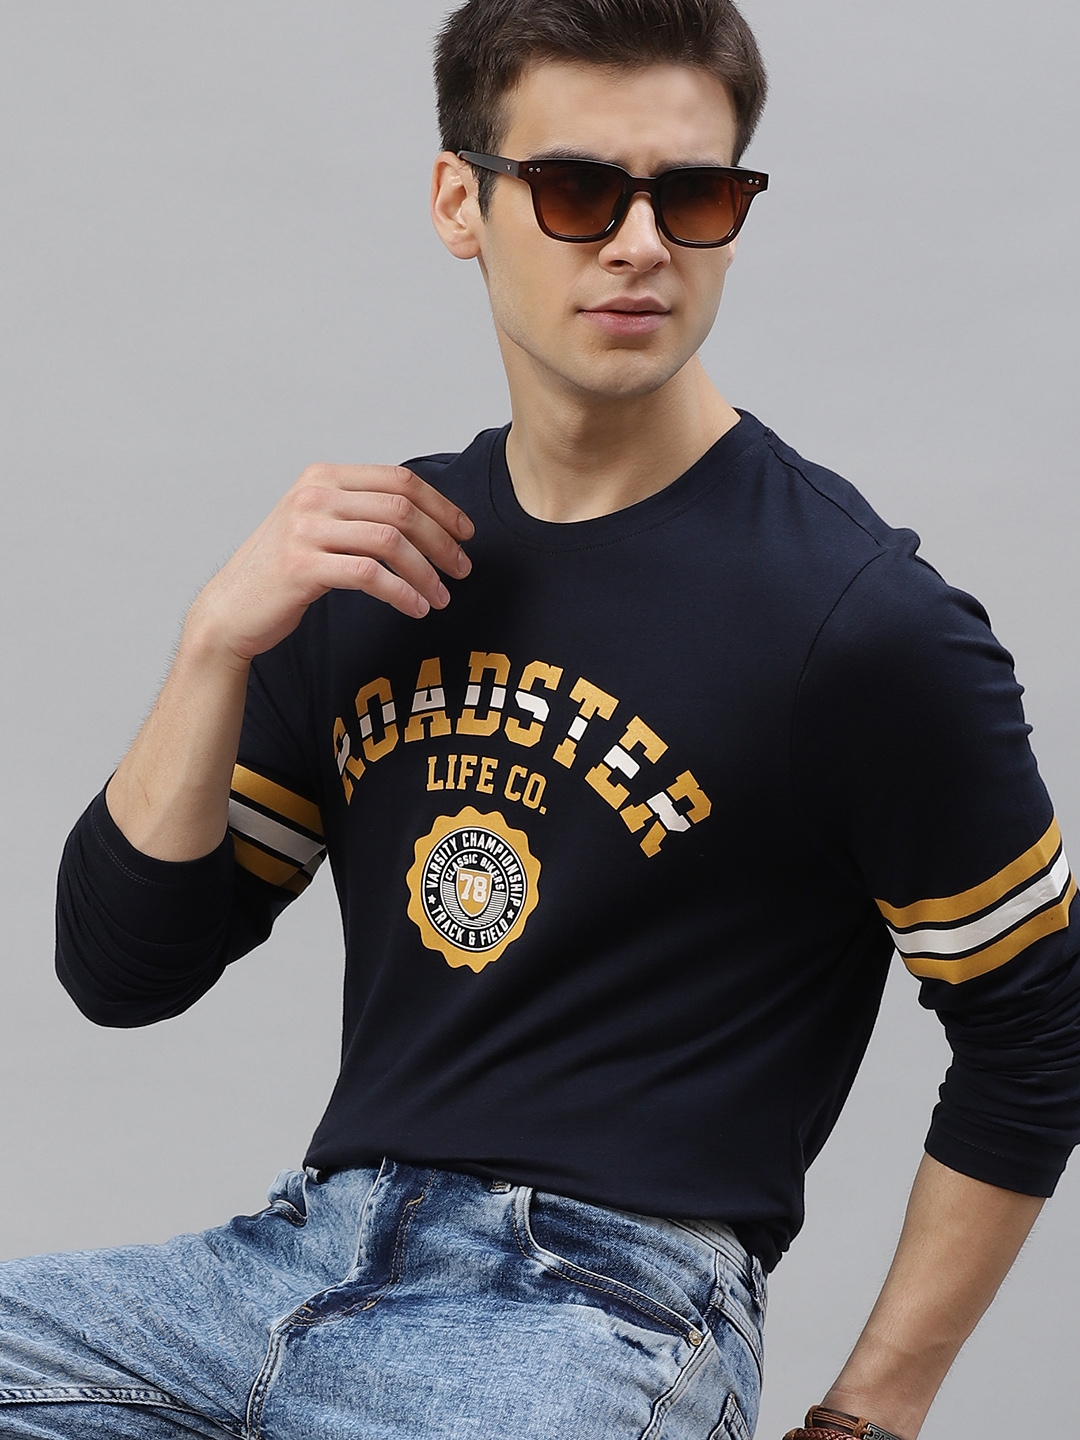 Buy The Roadster Lifestyle Co Men Navy Pure Cotton Printed Round Neck ...